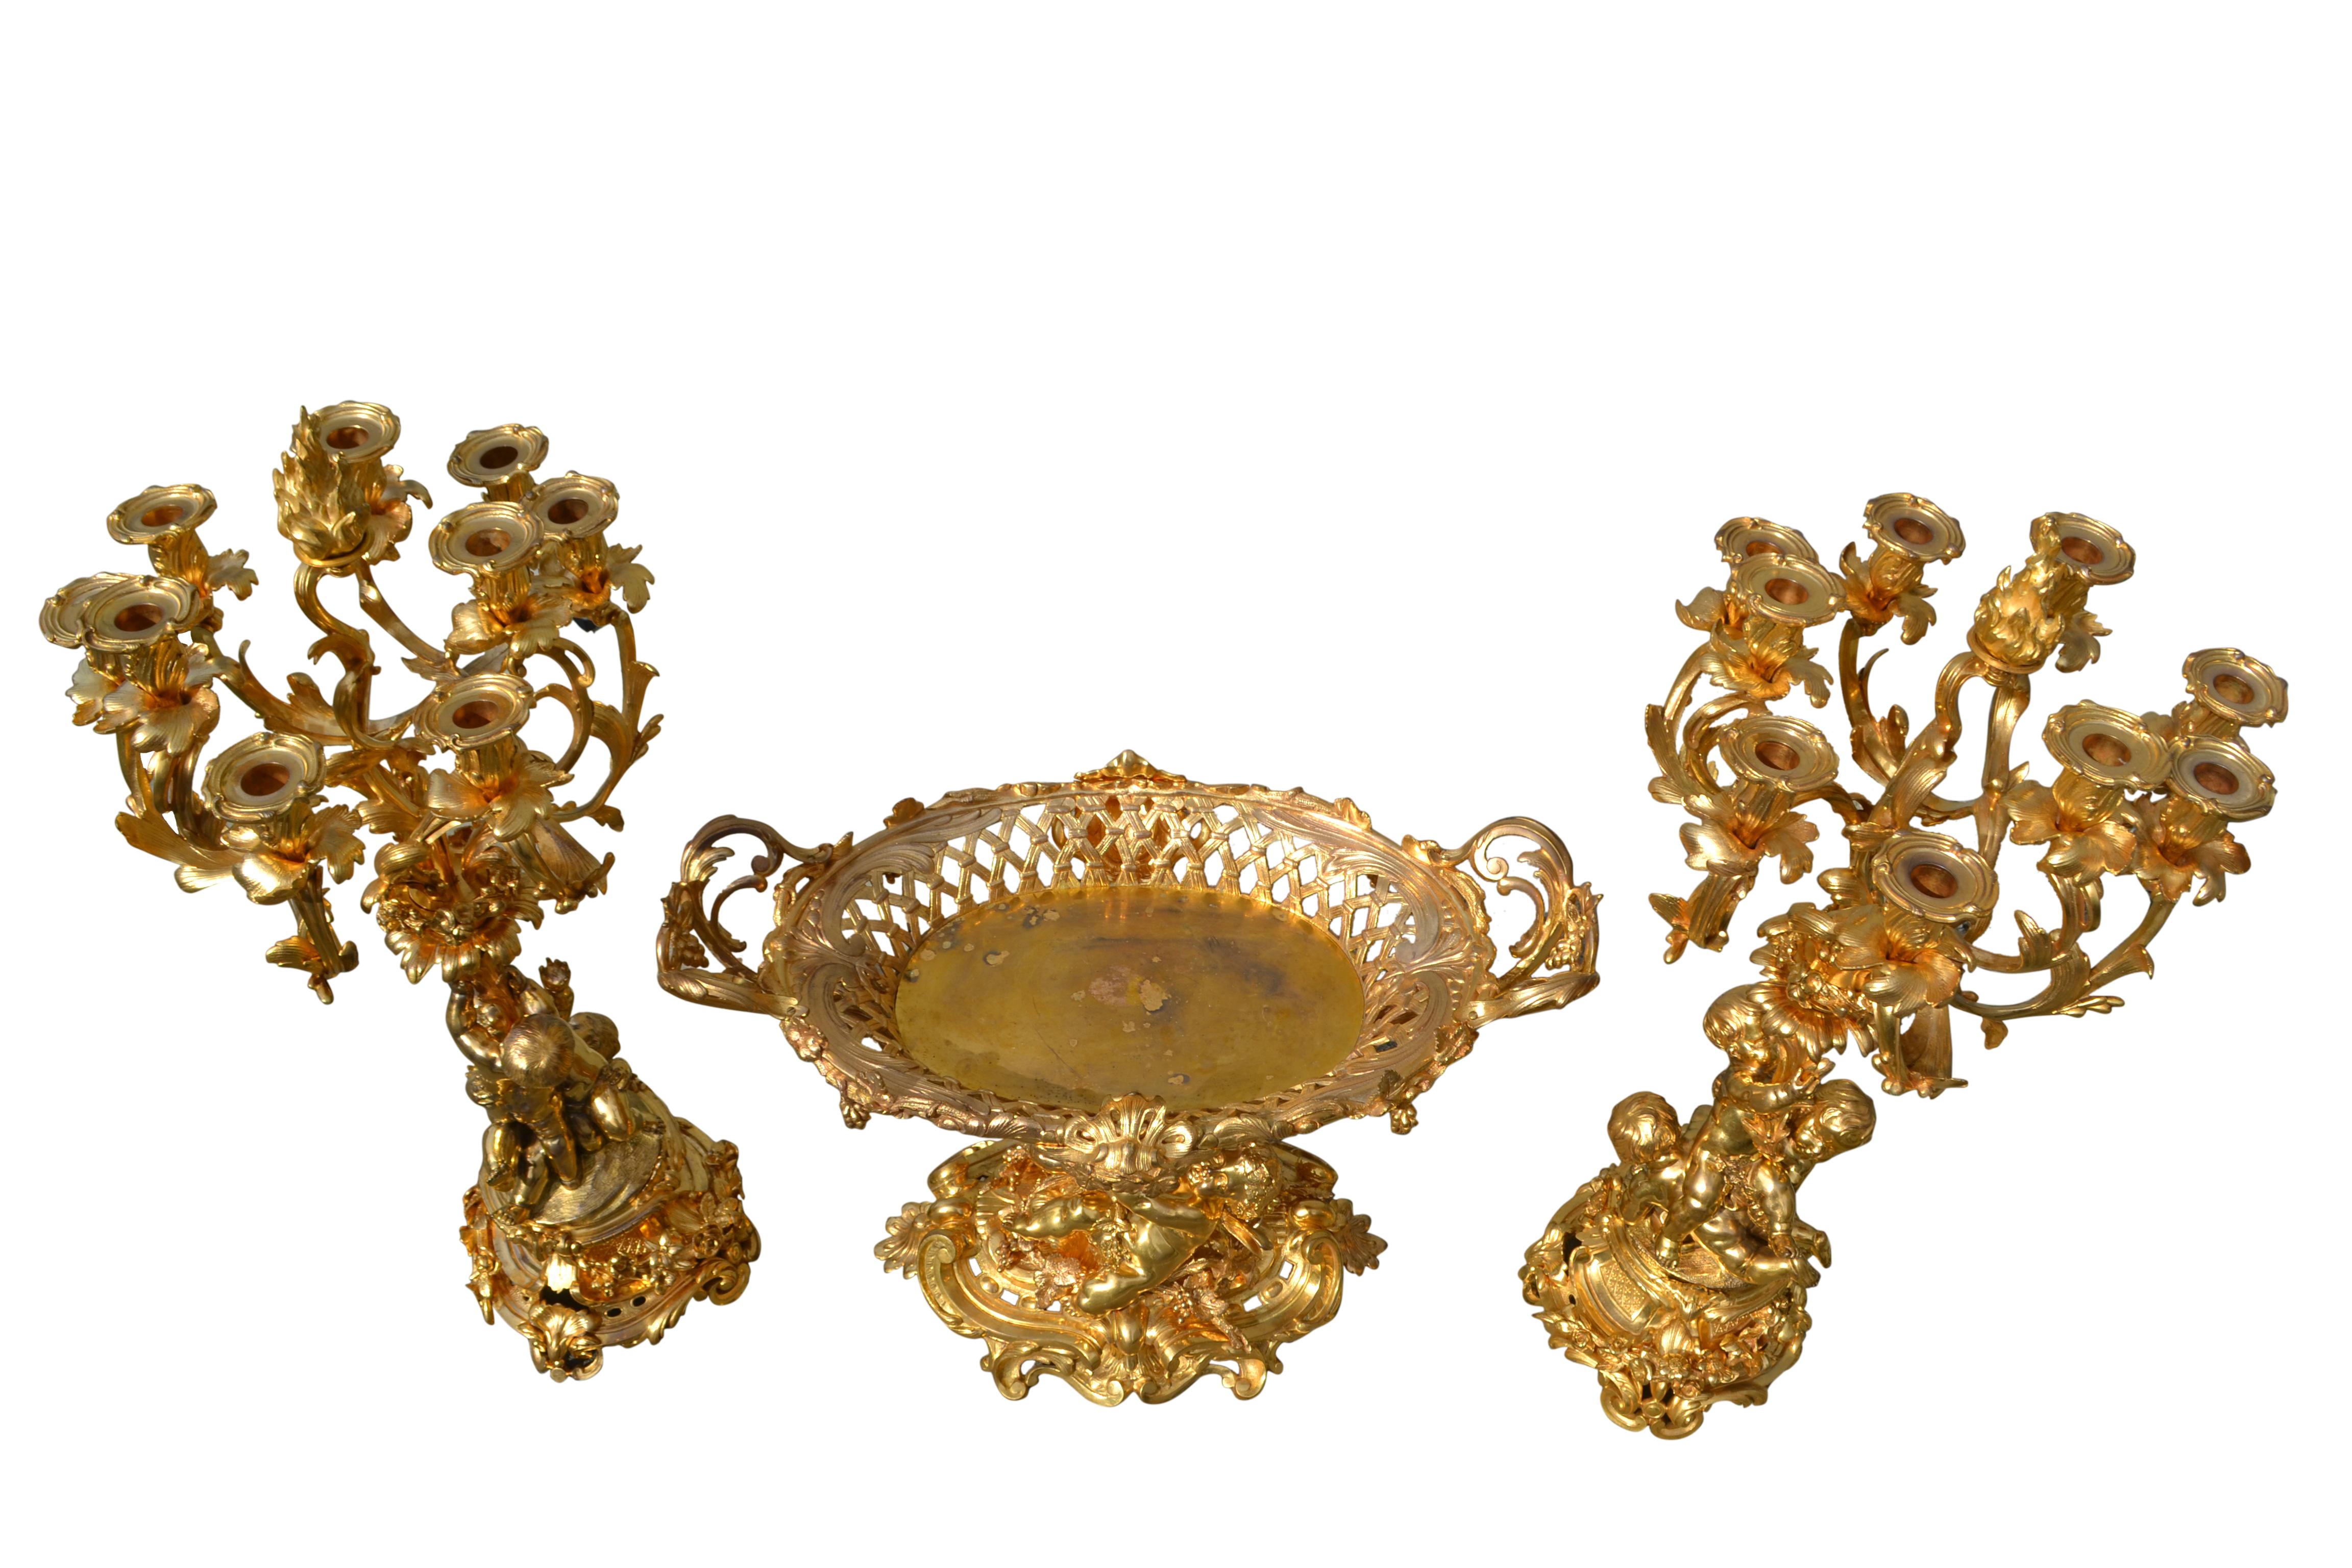 The candelabra feature three putti standing on an elaborate rocaille base holding aloft three flower and vine encrusted scrolling branches each with three candle nozzles 

The large gilded bronze table centre is supported by two winged putti